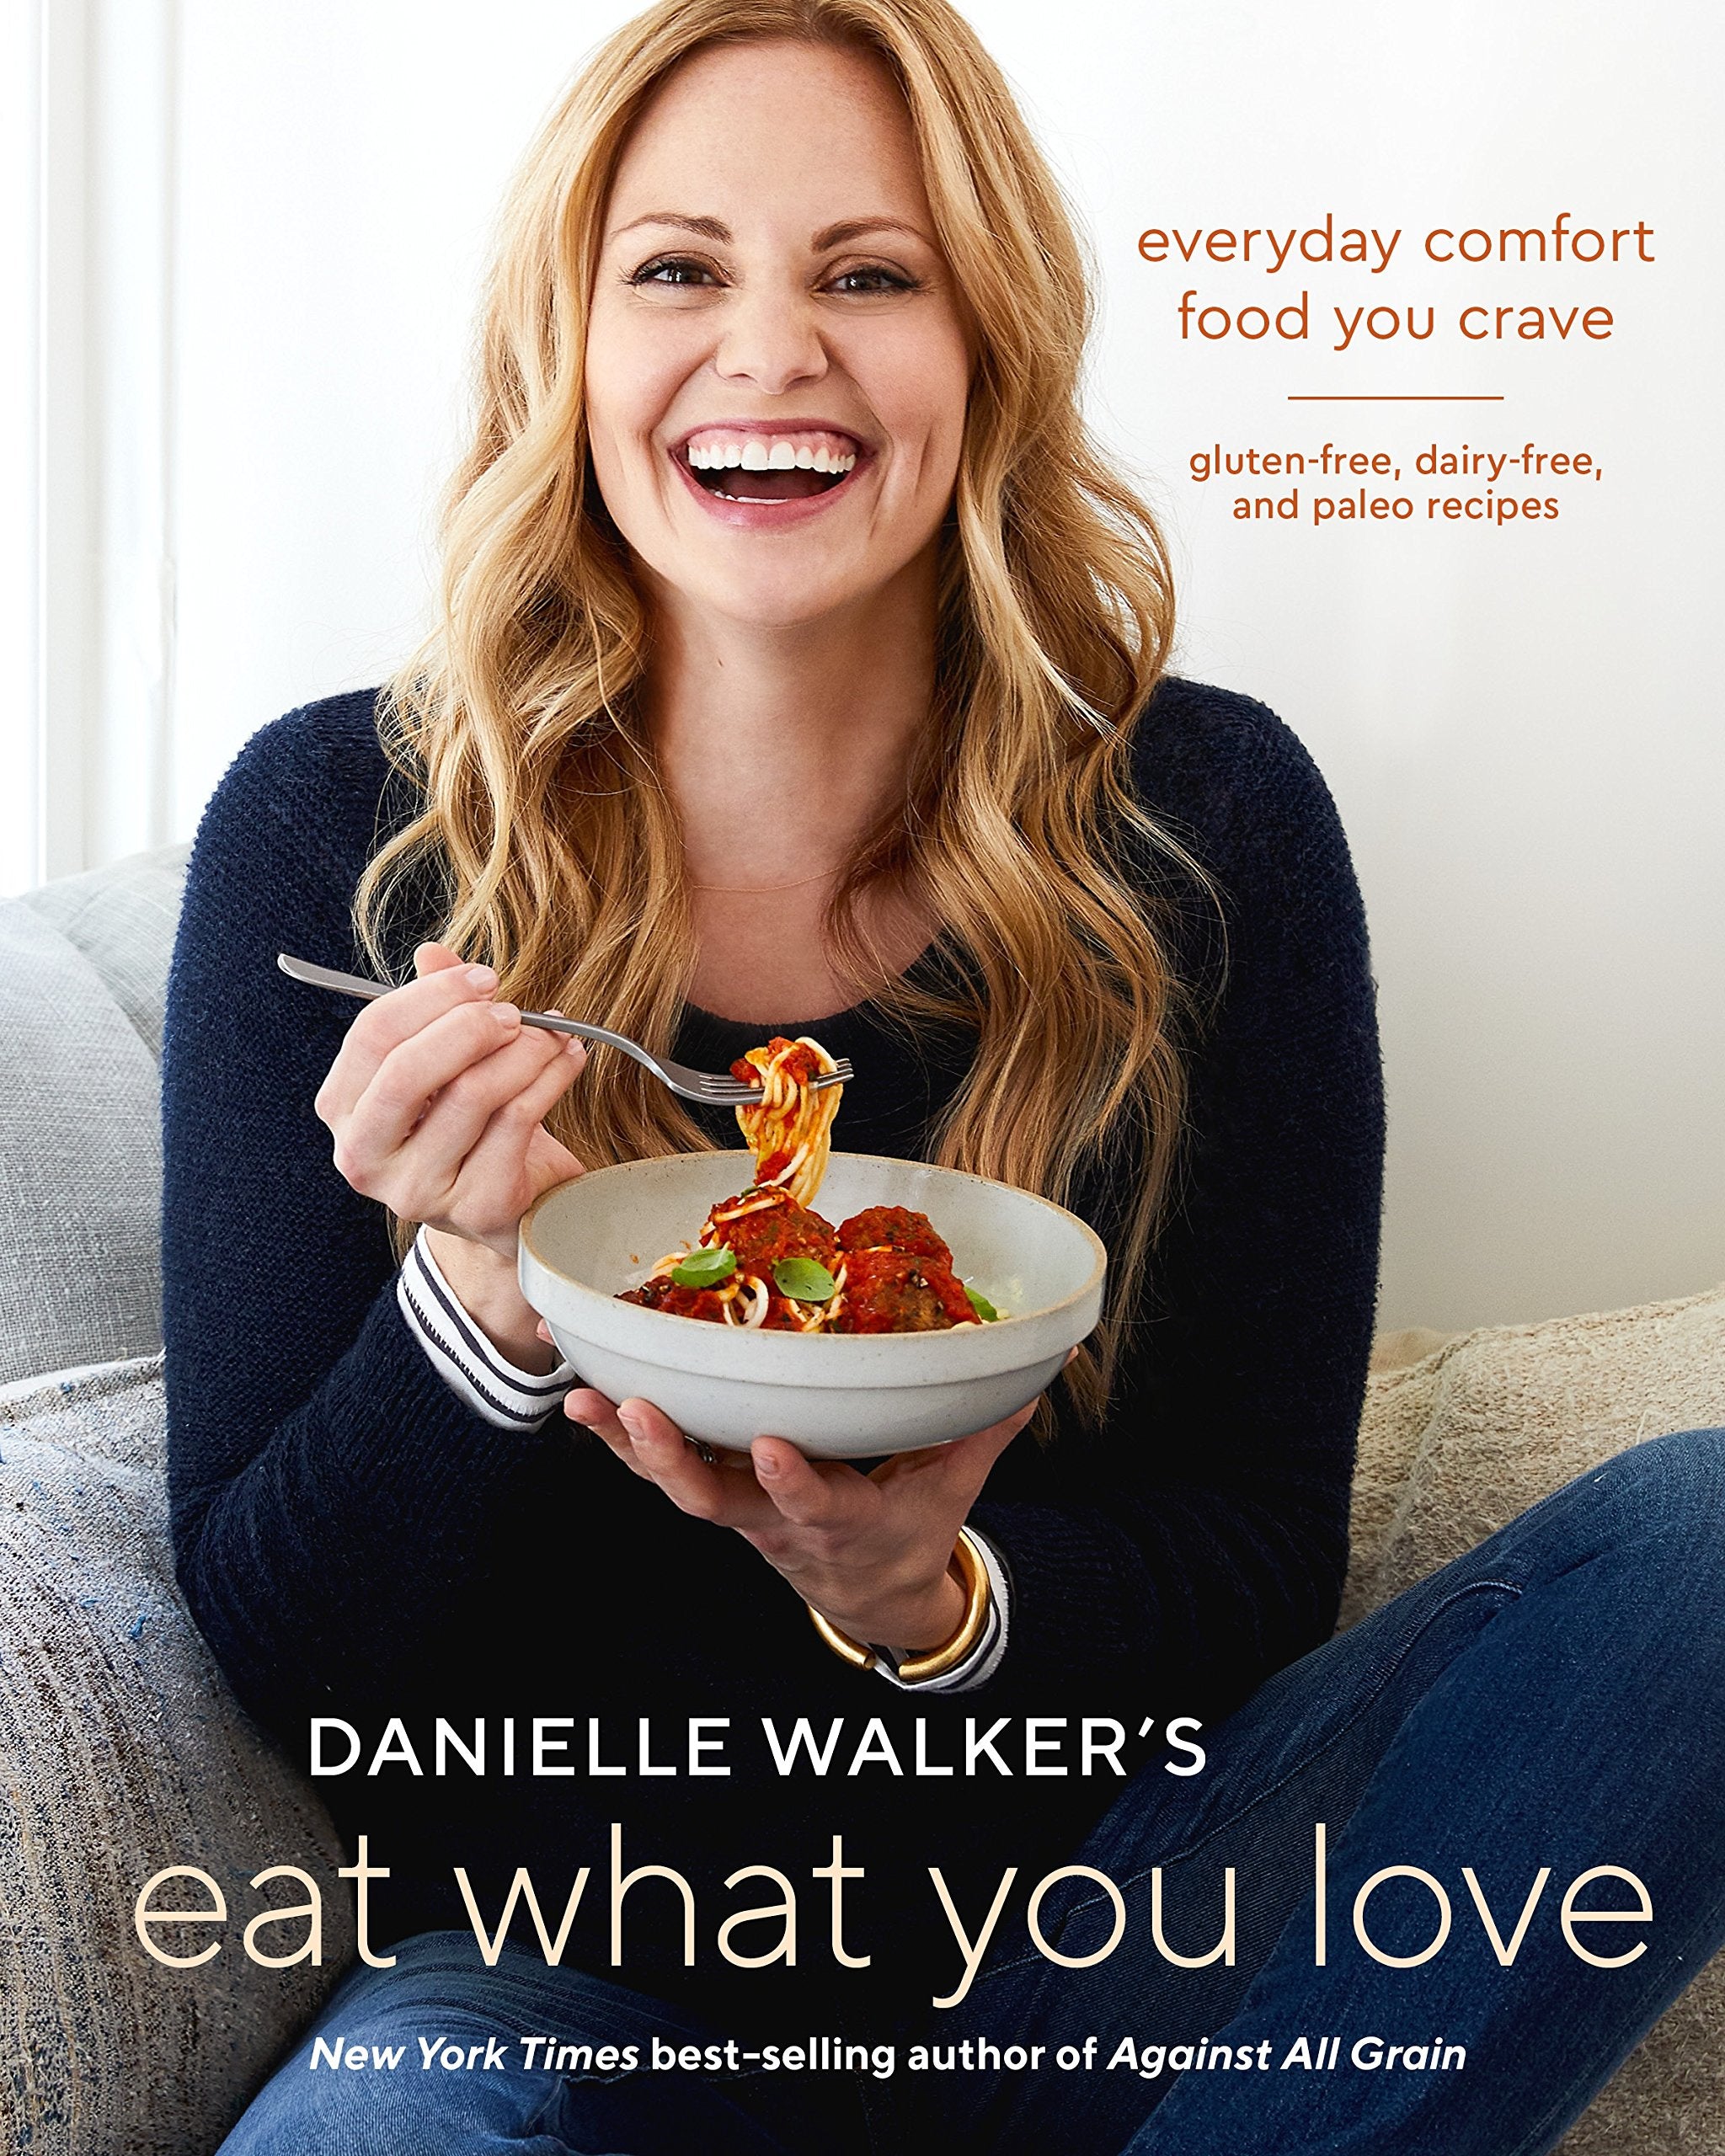 Danielle Walker's Eat What You Love: Everyday Comfort Food You Crave; Gluten-Free, Dairy-Free, and Paleo Recipe (Danielle Walker)